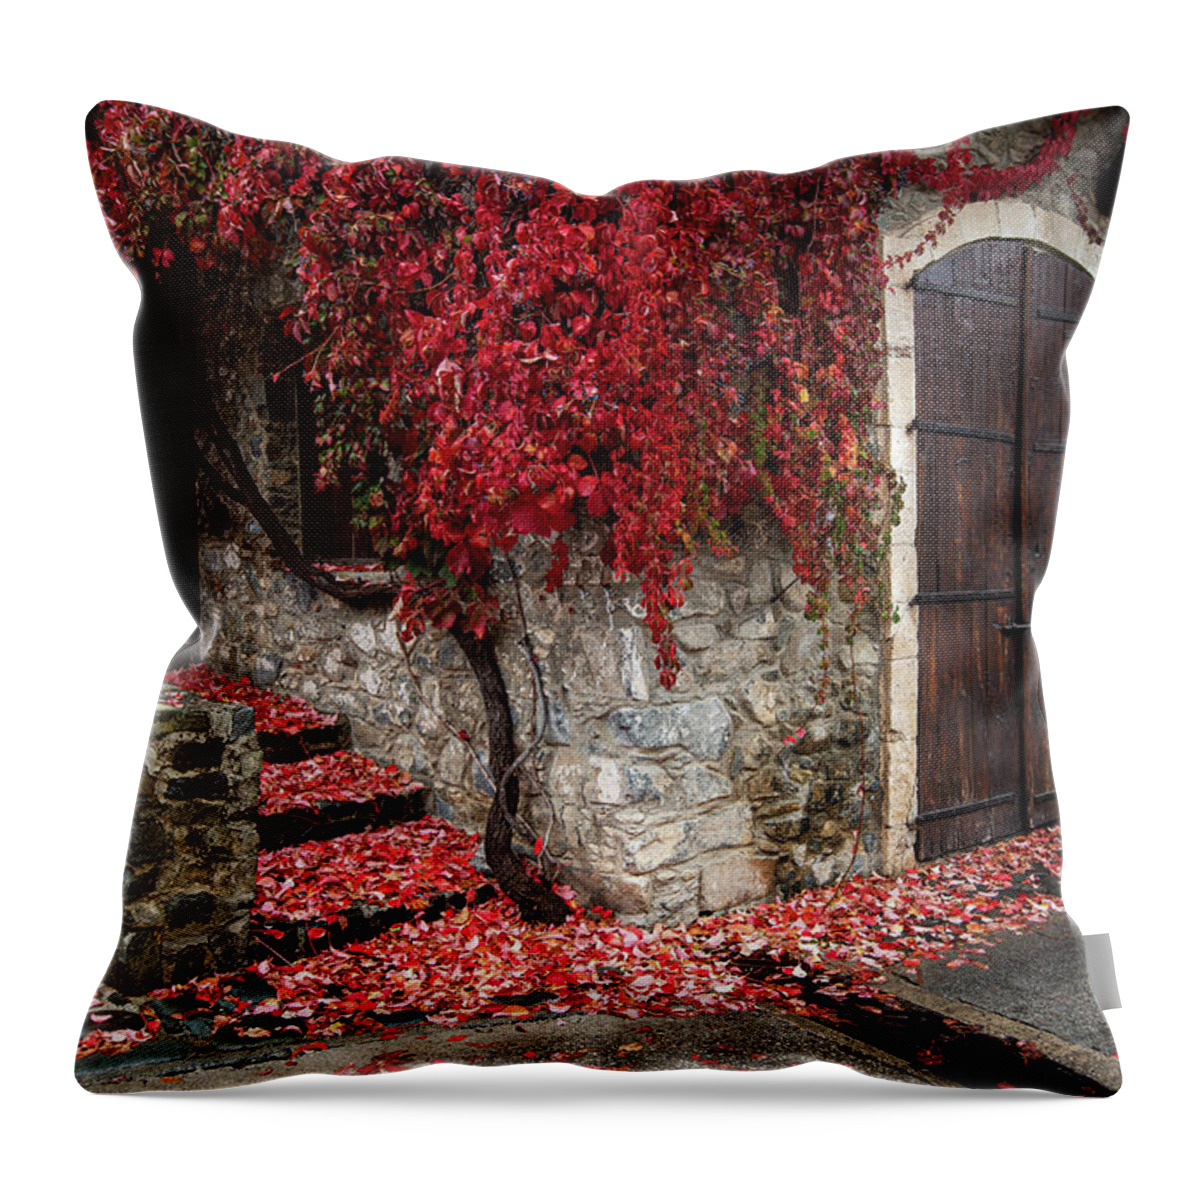 Autumn Throw Pillow featuring the photograph Autumn landscape with red plants on a hous wall by Michalakis Ppalis